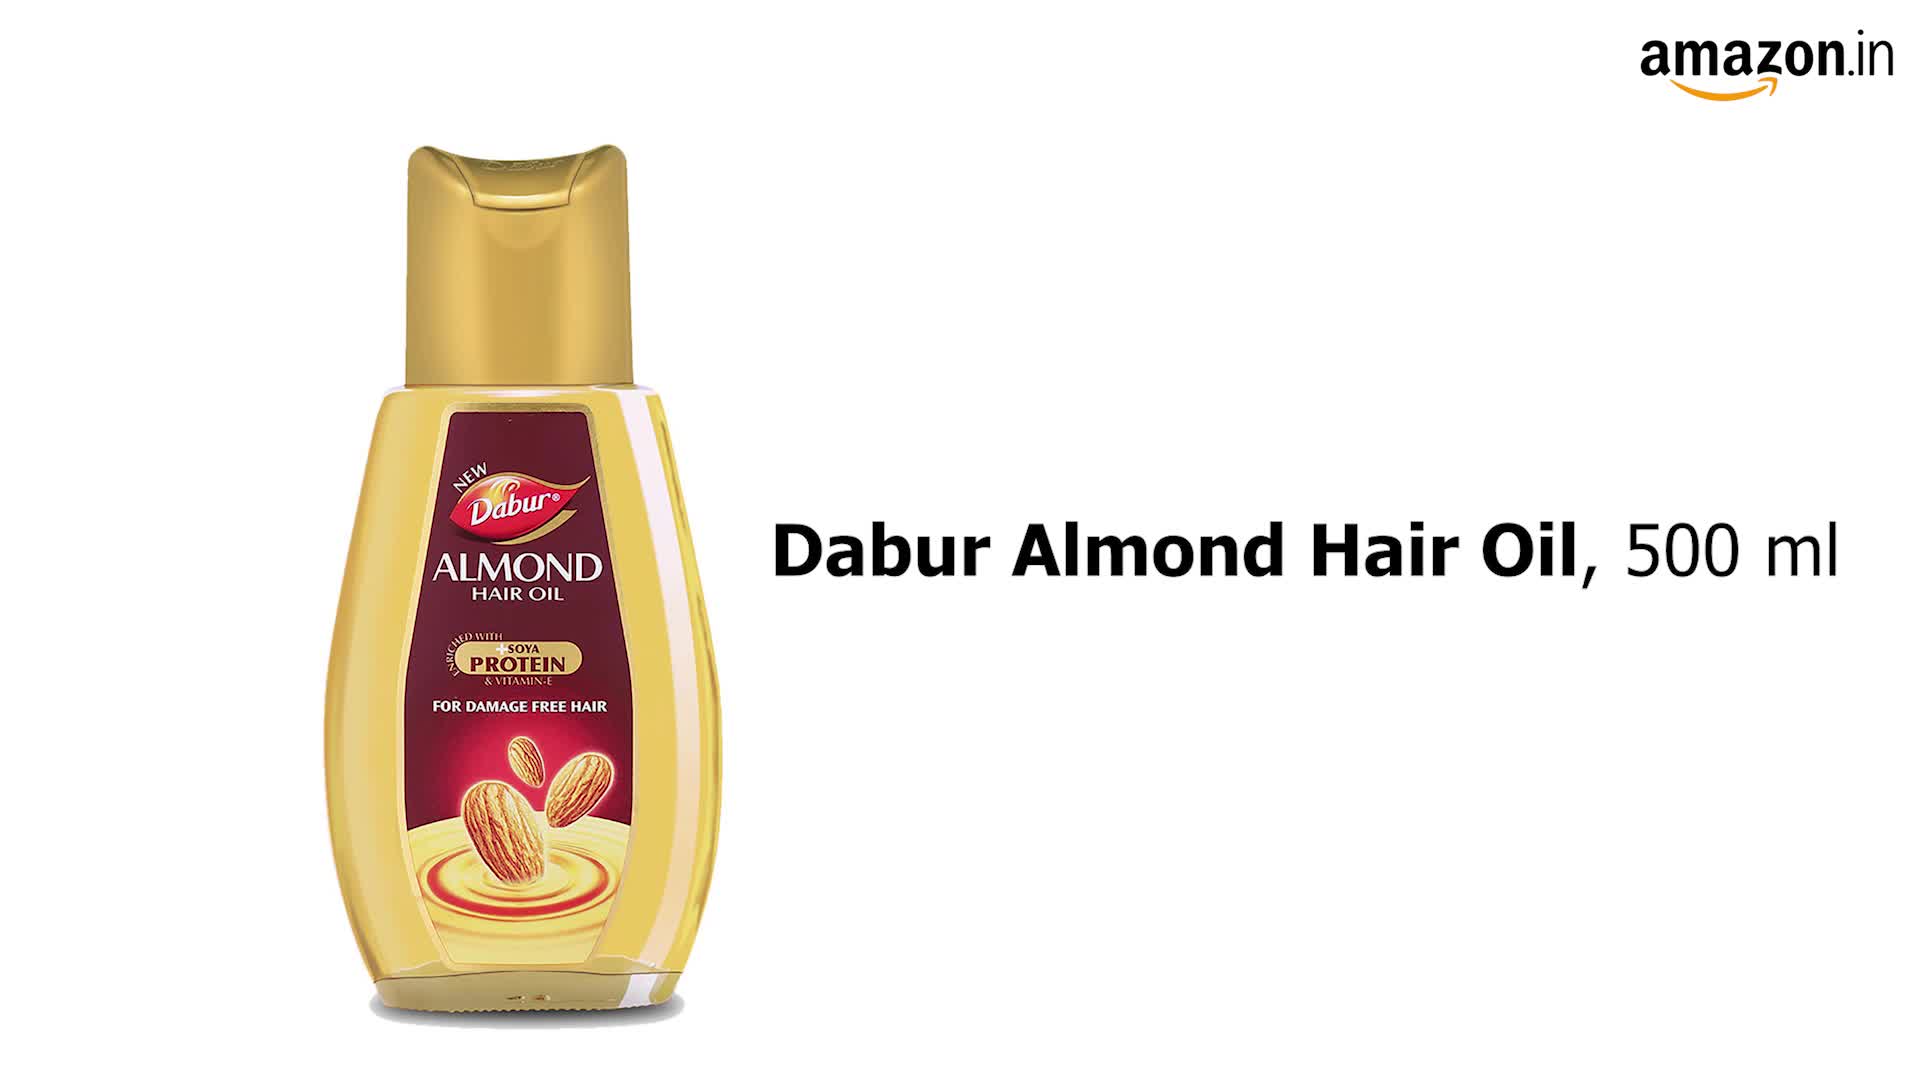 Dabur Almond Hair Oil with Almonds Soya Protein and Vitamin E for Non  Sticky Damage free Hair - 500ml - the best price and delivery | Globally